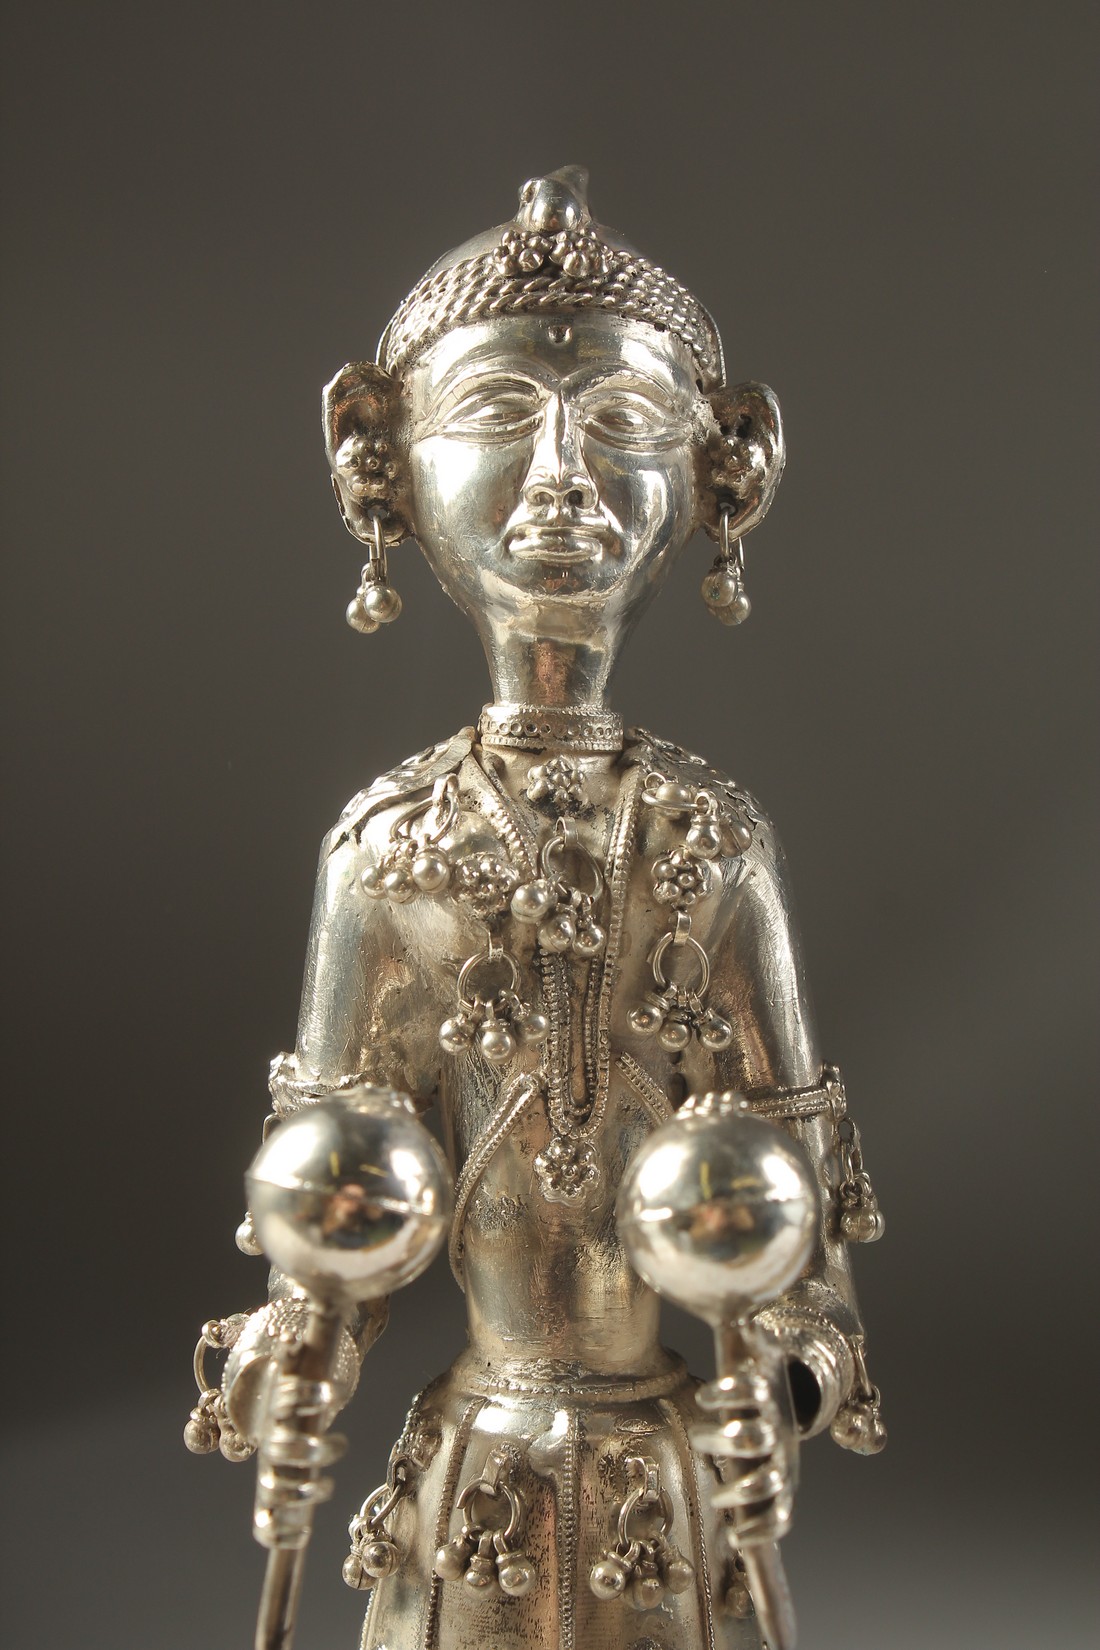 A FINE PAIR OF 19TH CENTURY INDIAN SILVER FIGURES OF MUSICIANS, 30cm high. - Image 4 of 11